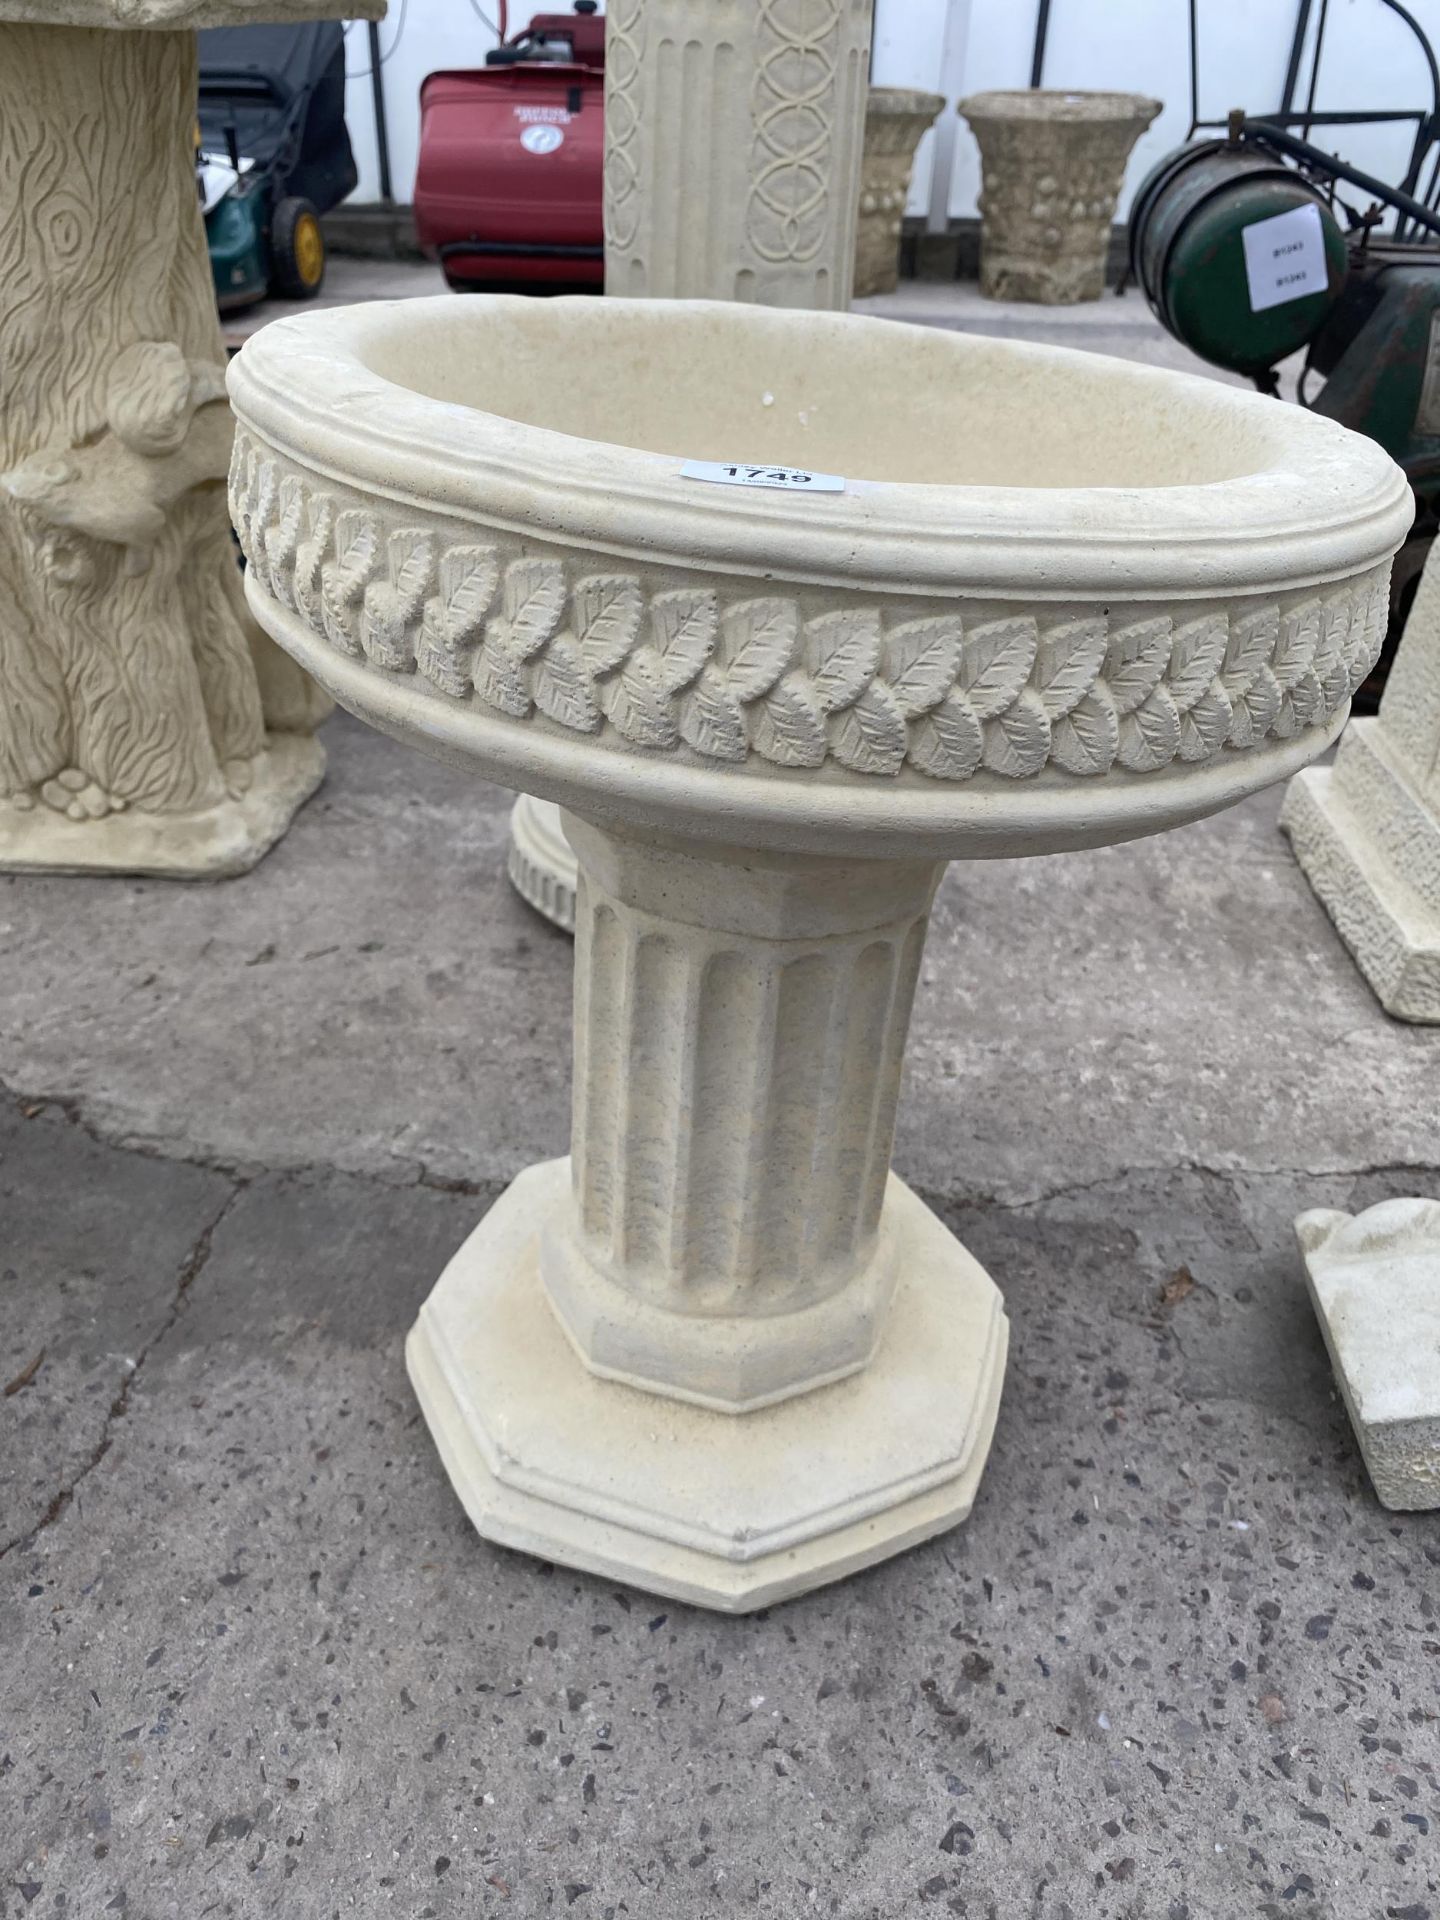 AN AS NEW EX DISPLAY CONCRETE COLUMN BIRDBATH *PLEASE NOTE VAT TO BE PAID ON THIS ITEM*